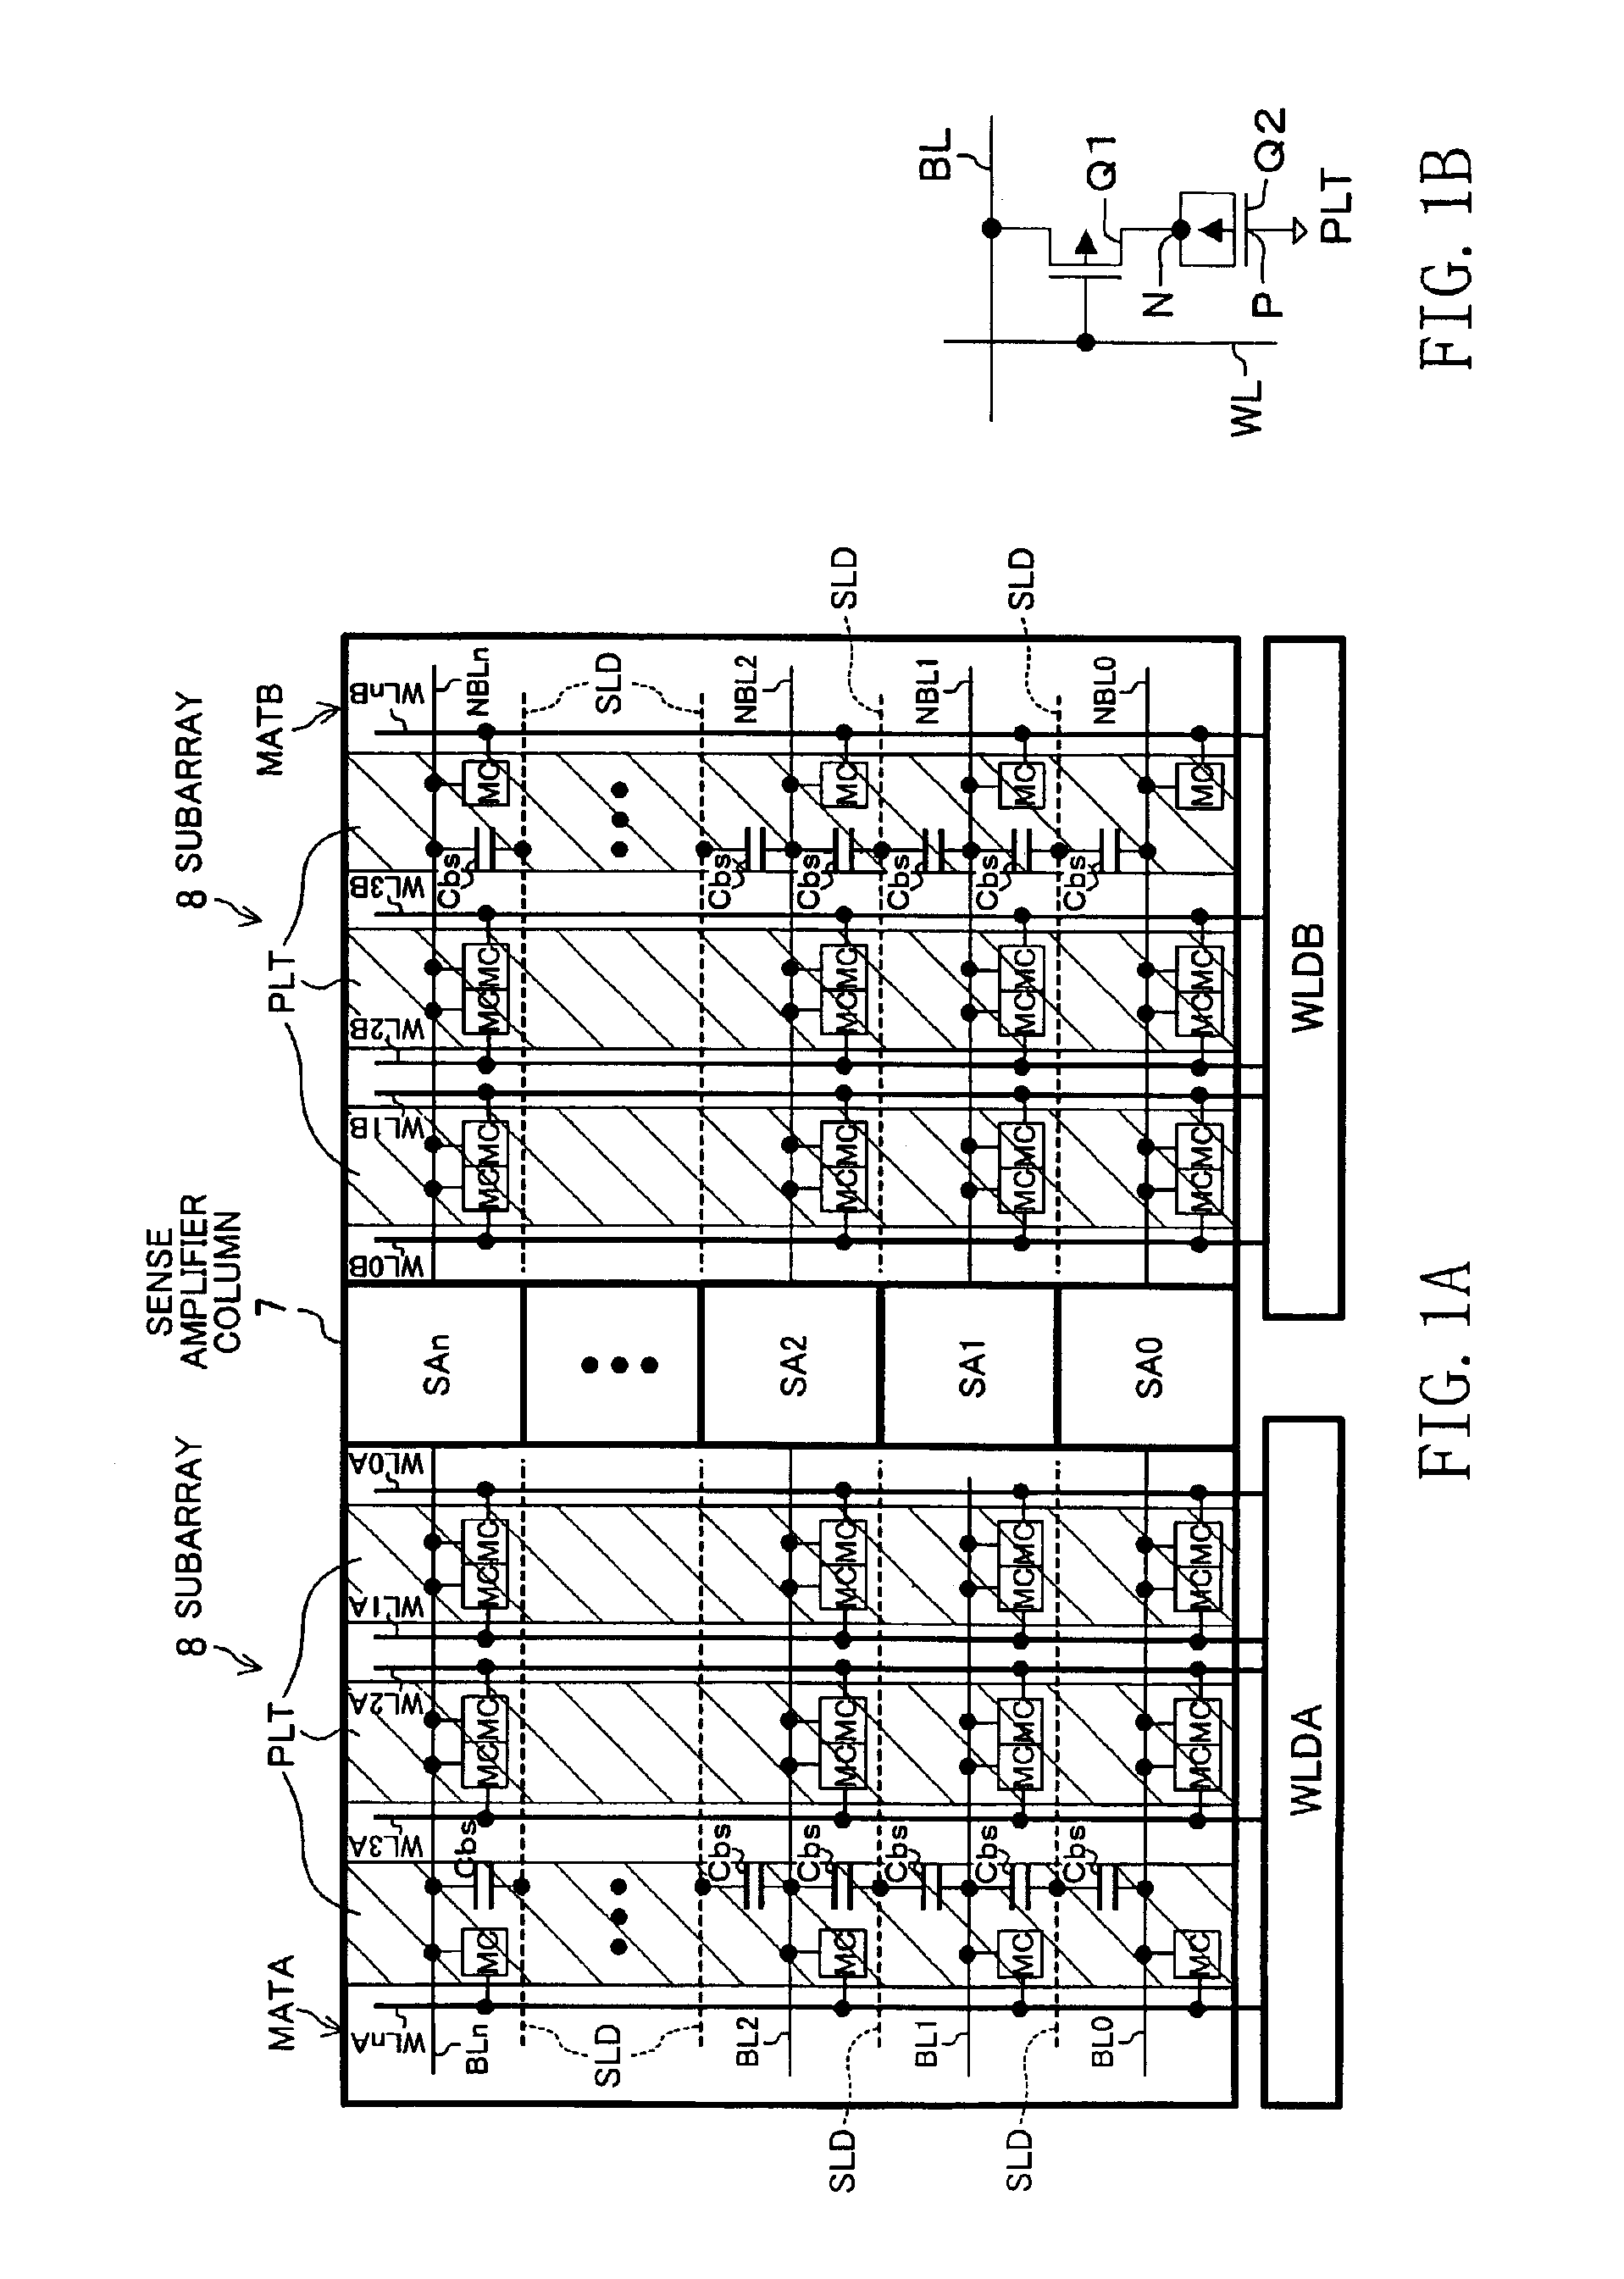 Semiconductor memory device in which bit lines connected to dynamic memory cells extend left and right of sense amplifier column